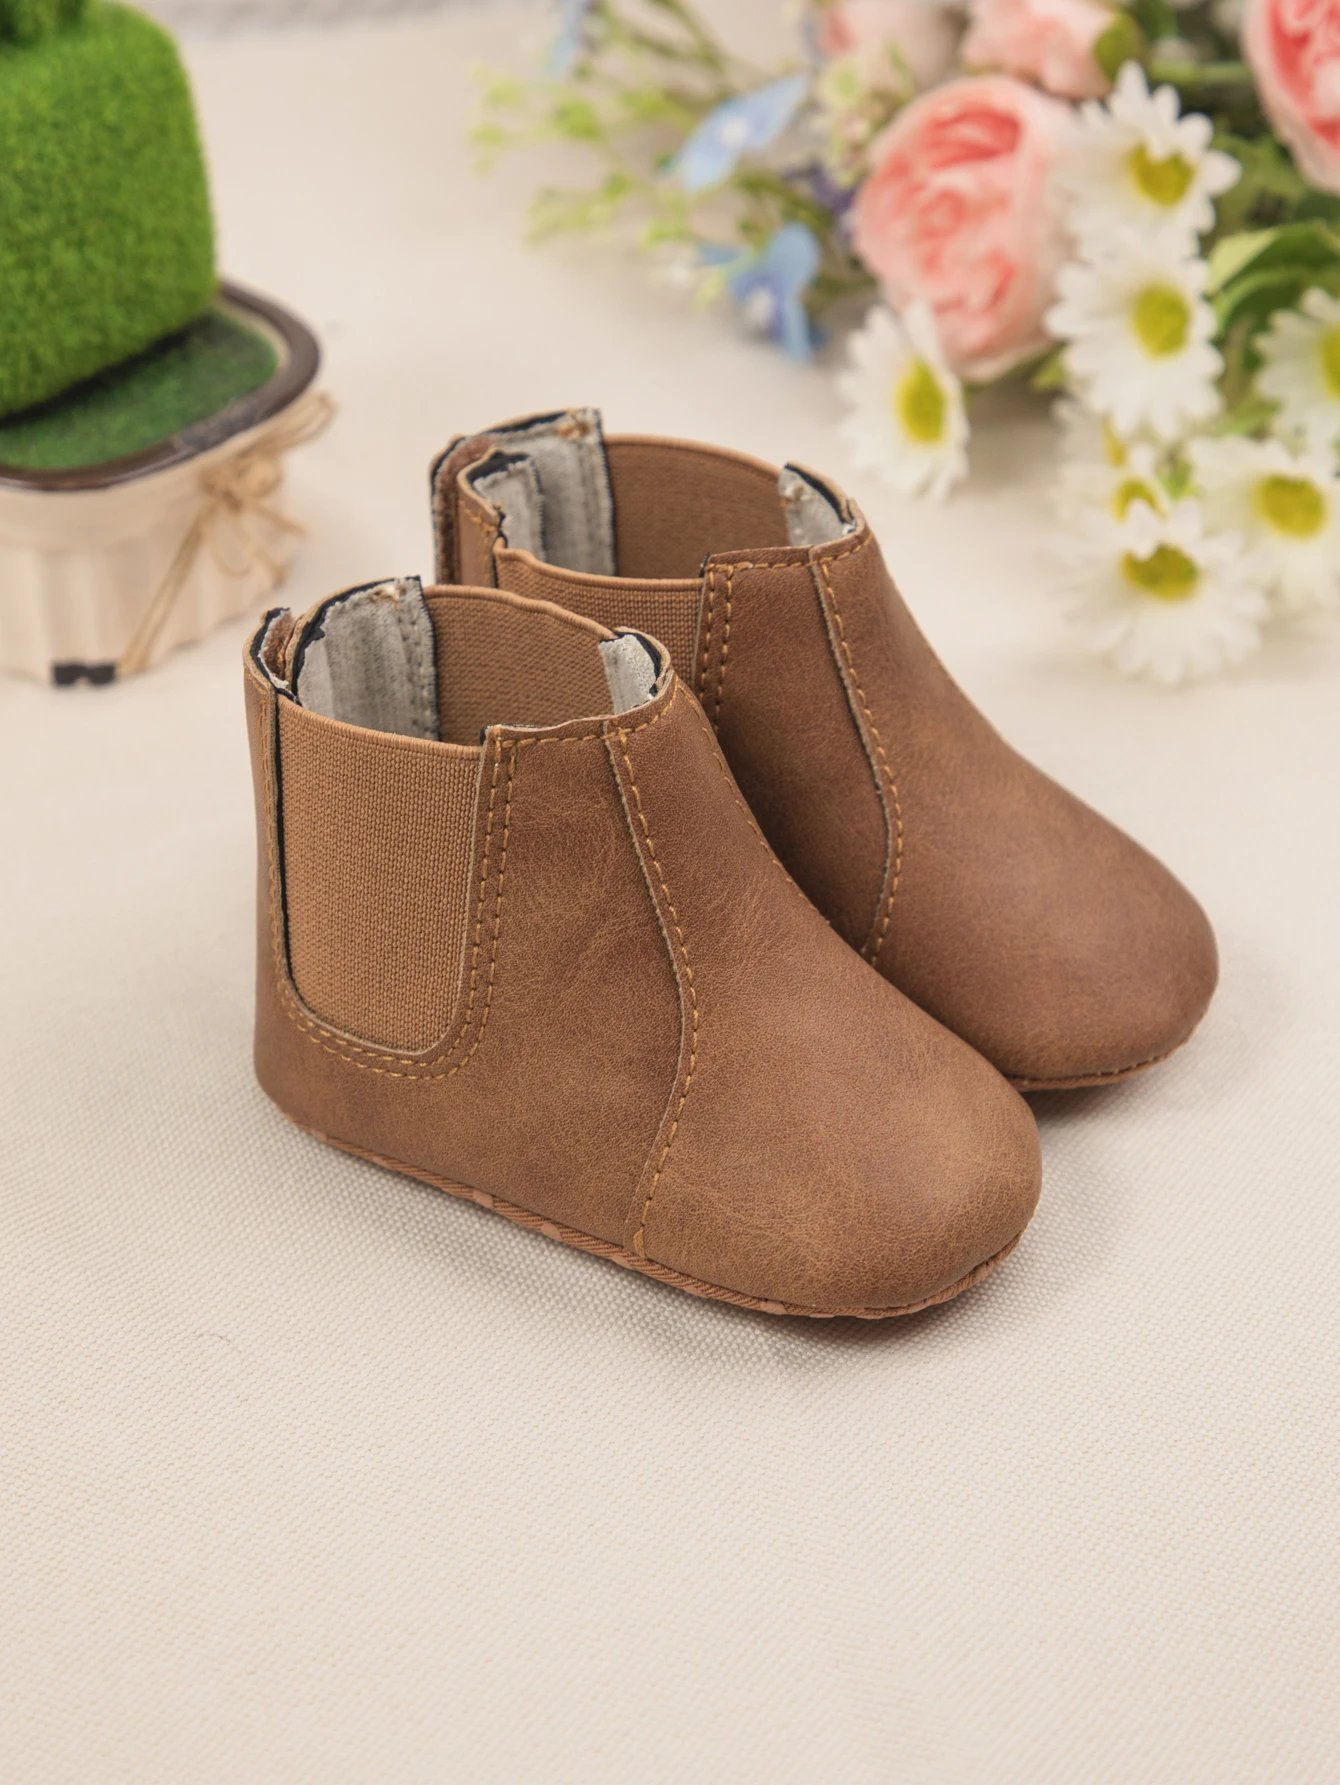 New Newborn Baby Casual Toddler Shoes Baby Boy Girl Solid Color Boots Anti-Slip Warm Cotton Shoes Sole Baby Shoes Four Seasons 0